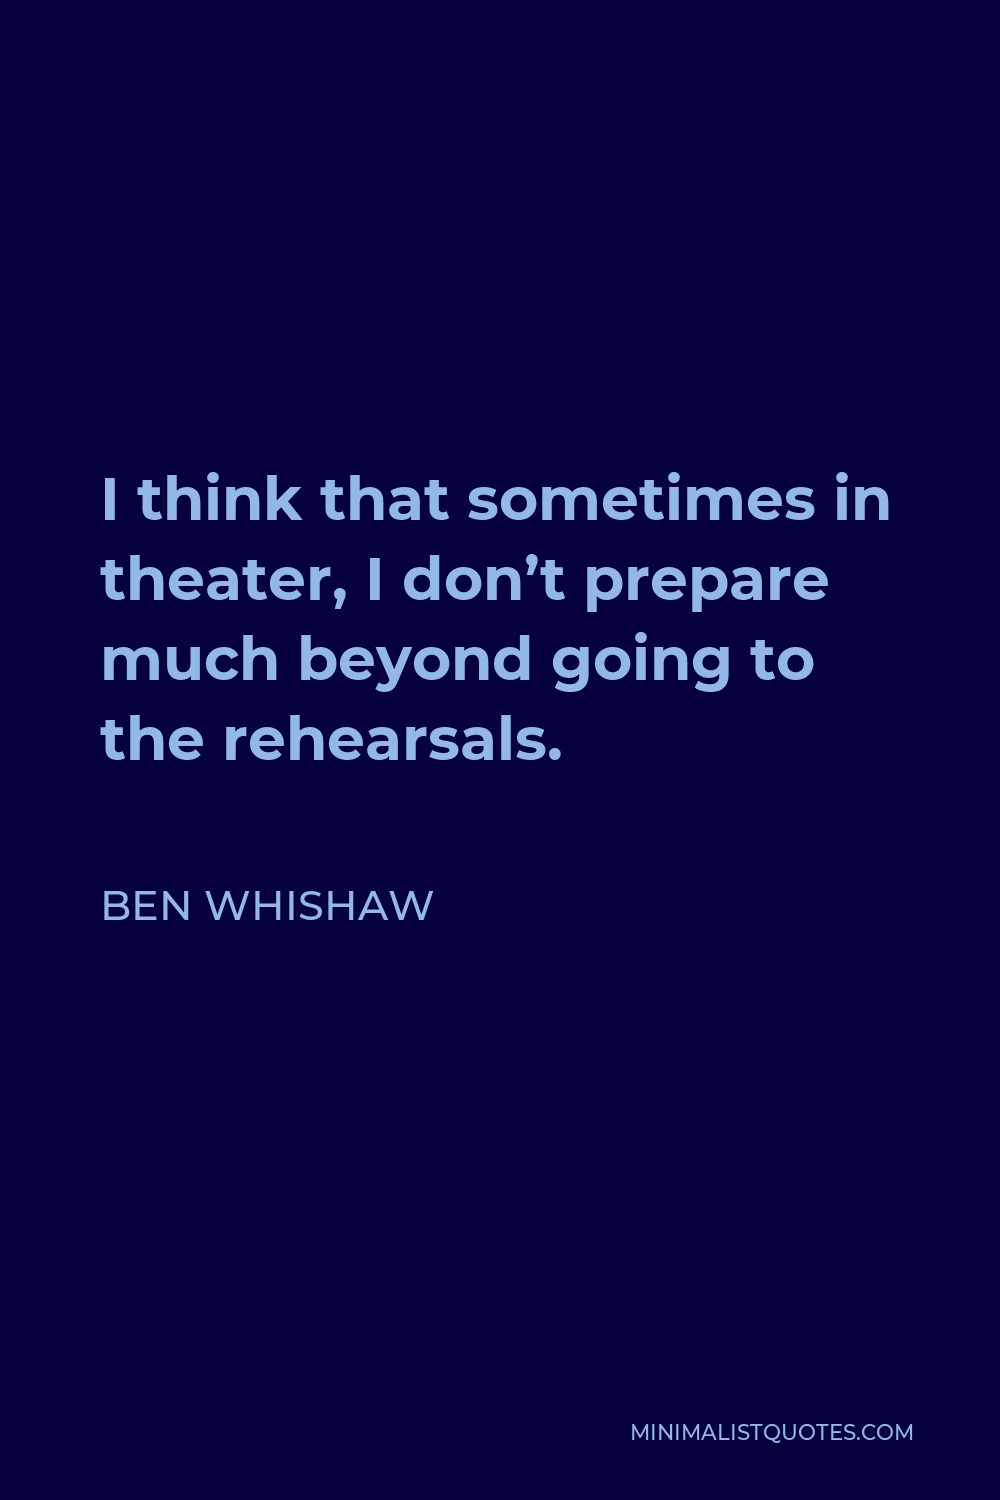 Ben Whishaw Quote - I think that sometimes in theater, I don’t prepare much beyond going to the rehearsals.